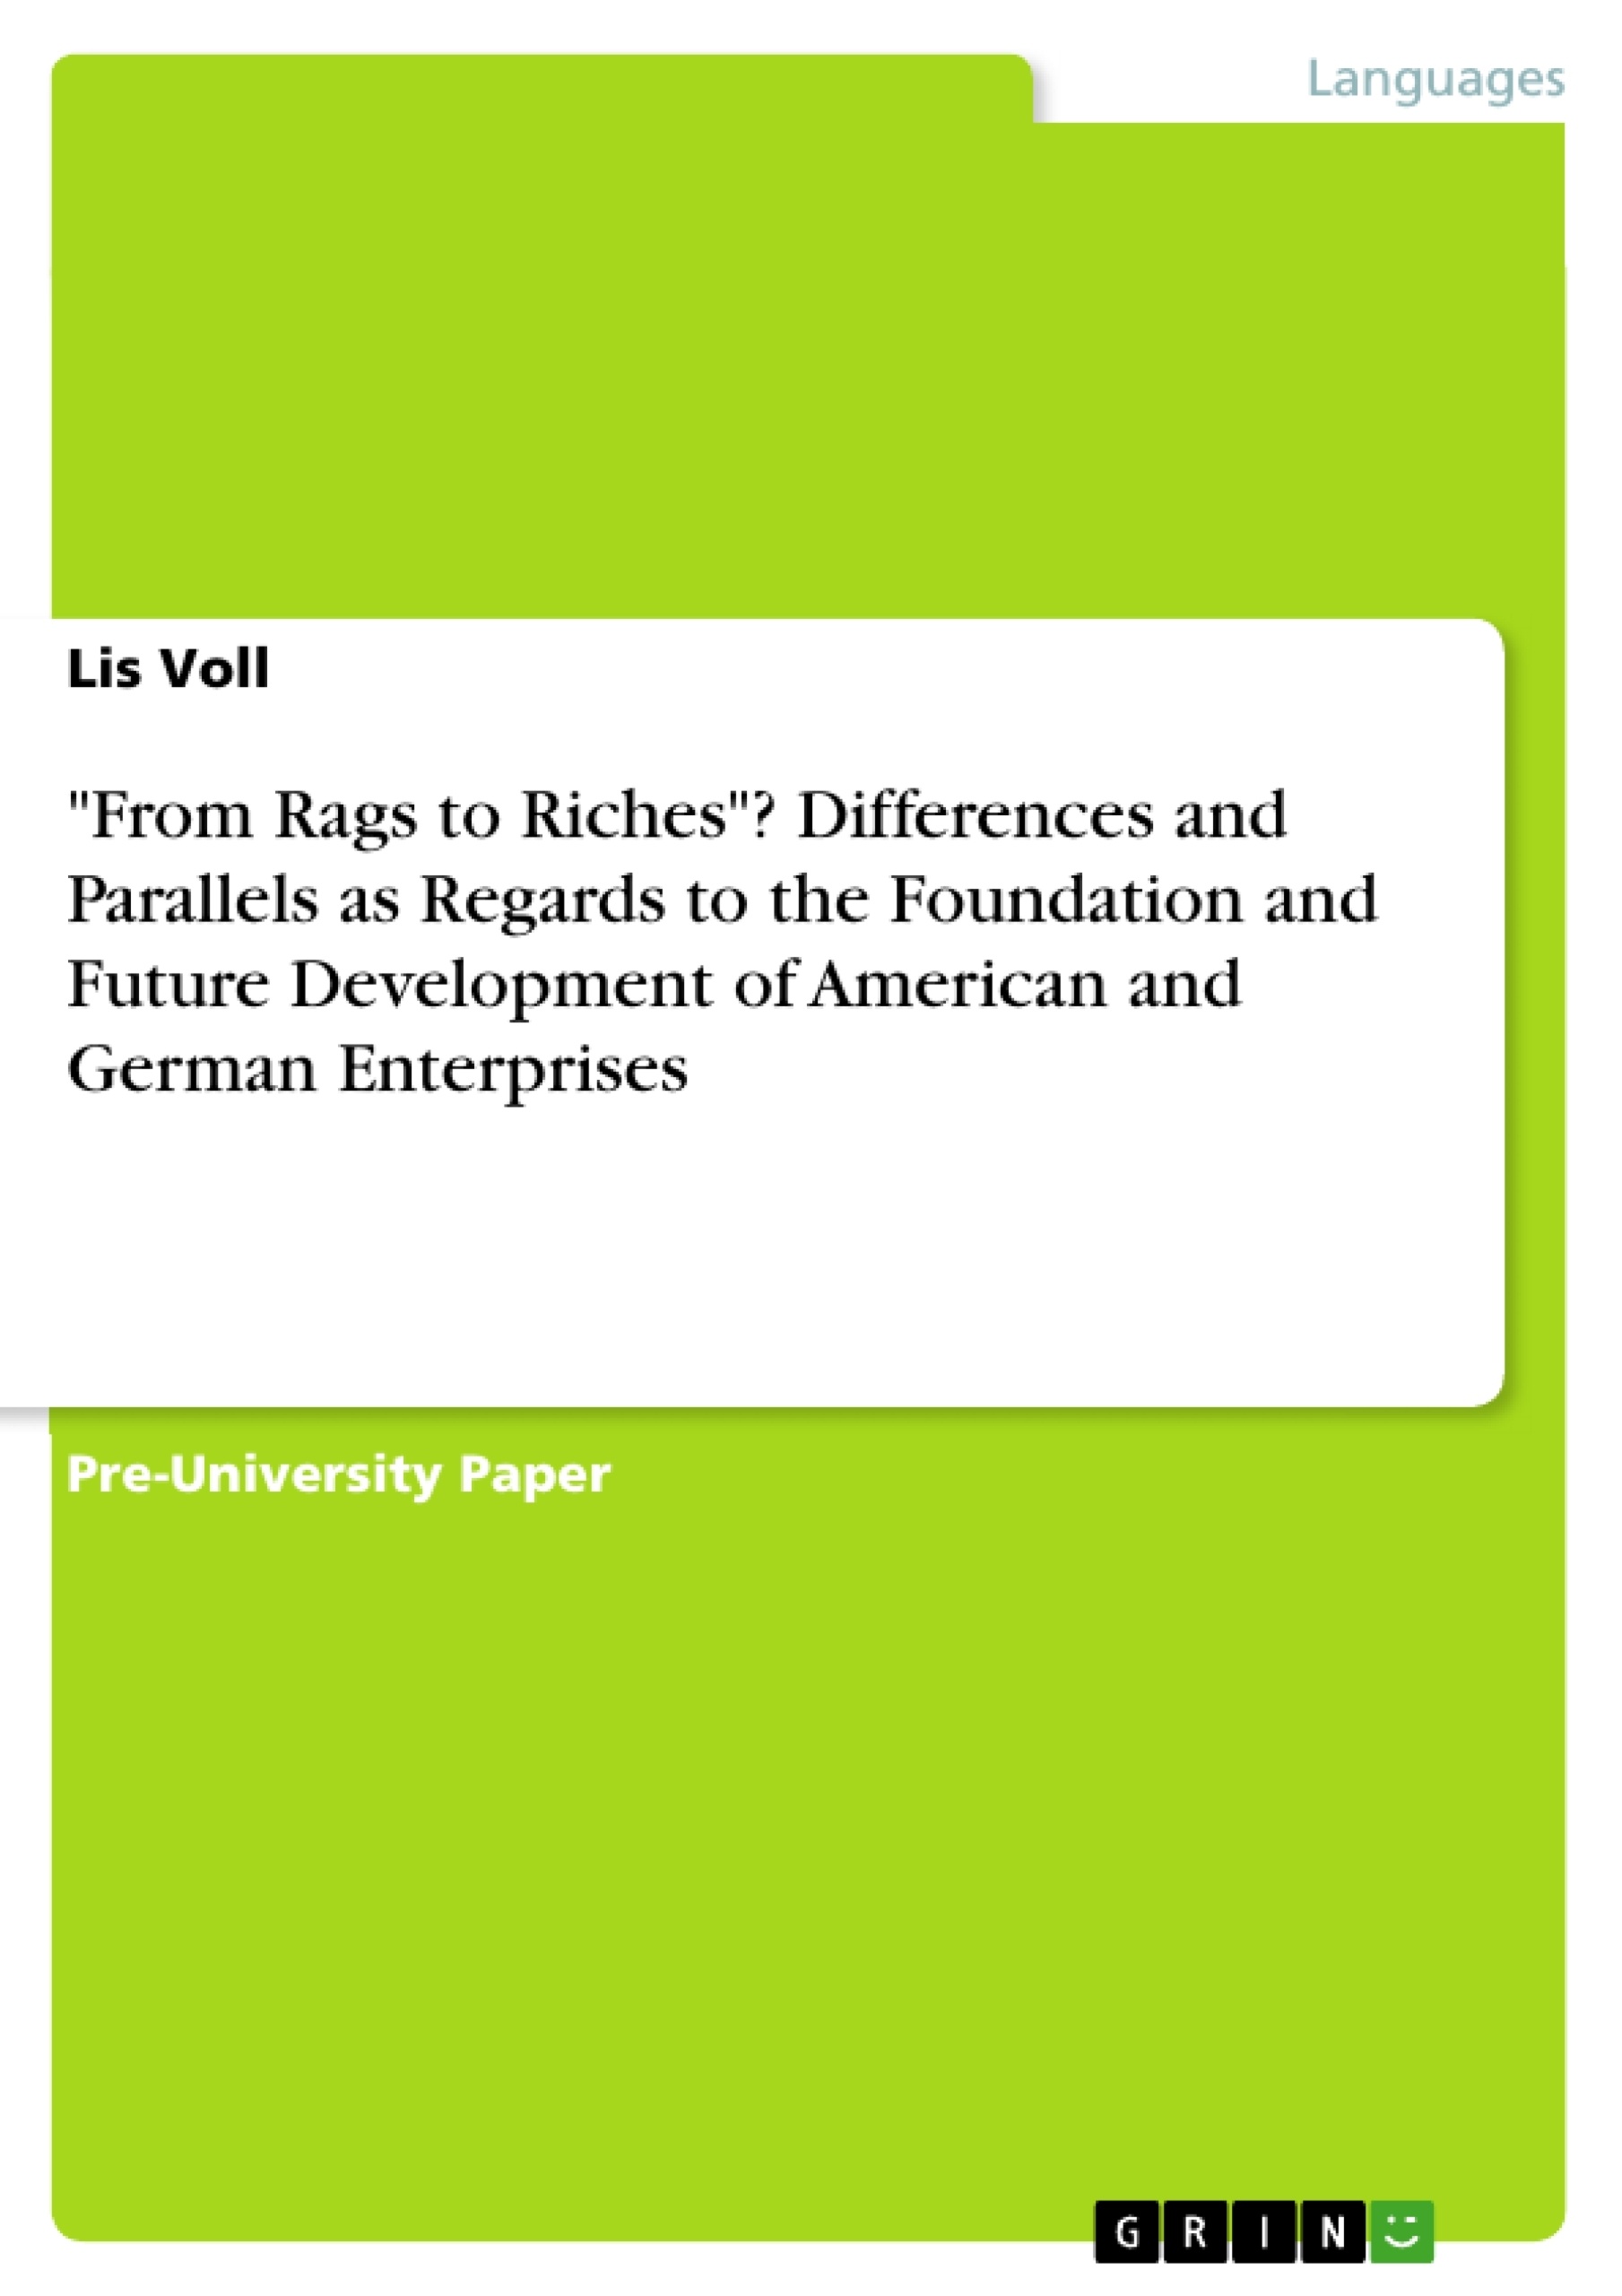 Titel: "From Rags to Riches"? Differences and Parallels as Regards to the Foundation and Future Development of American and German Enterprises